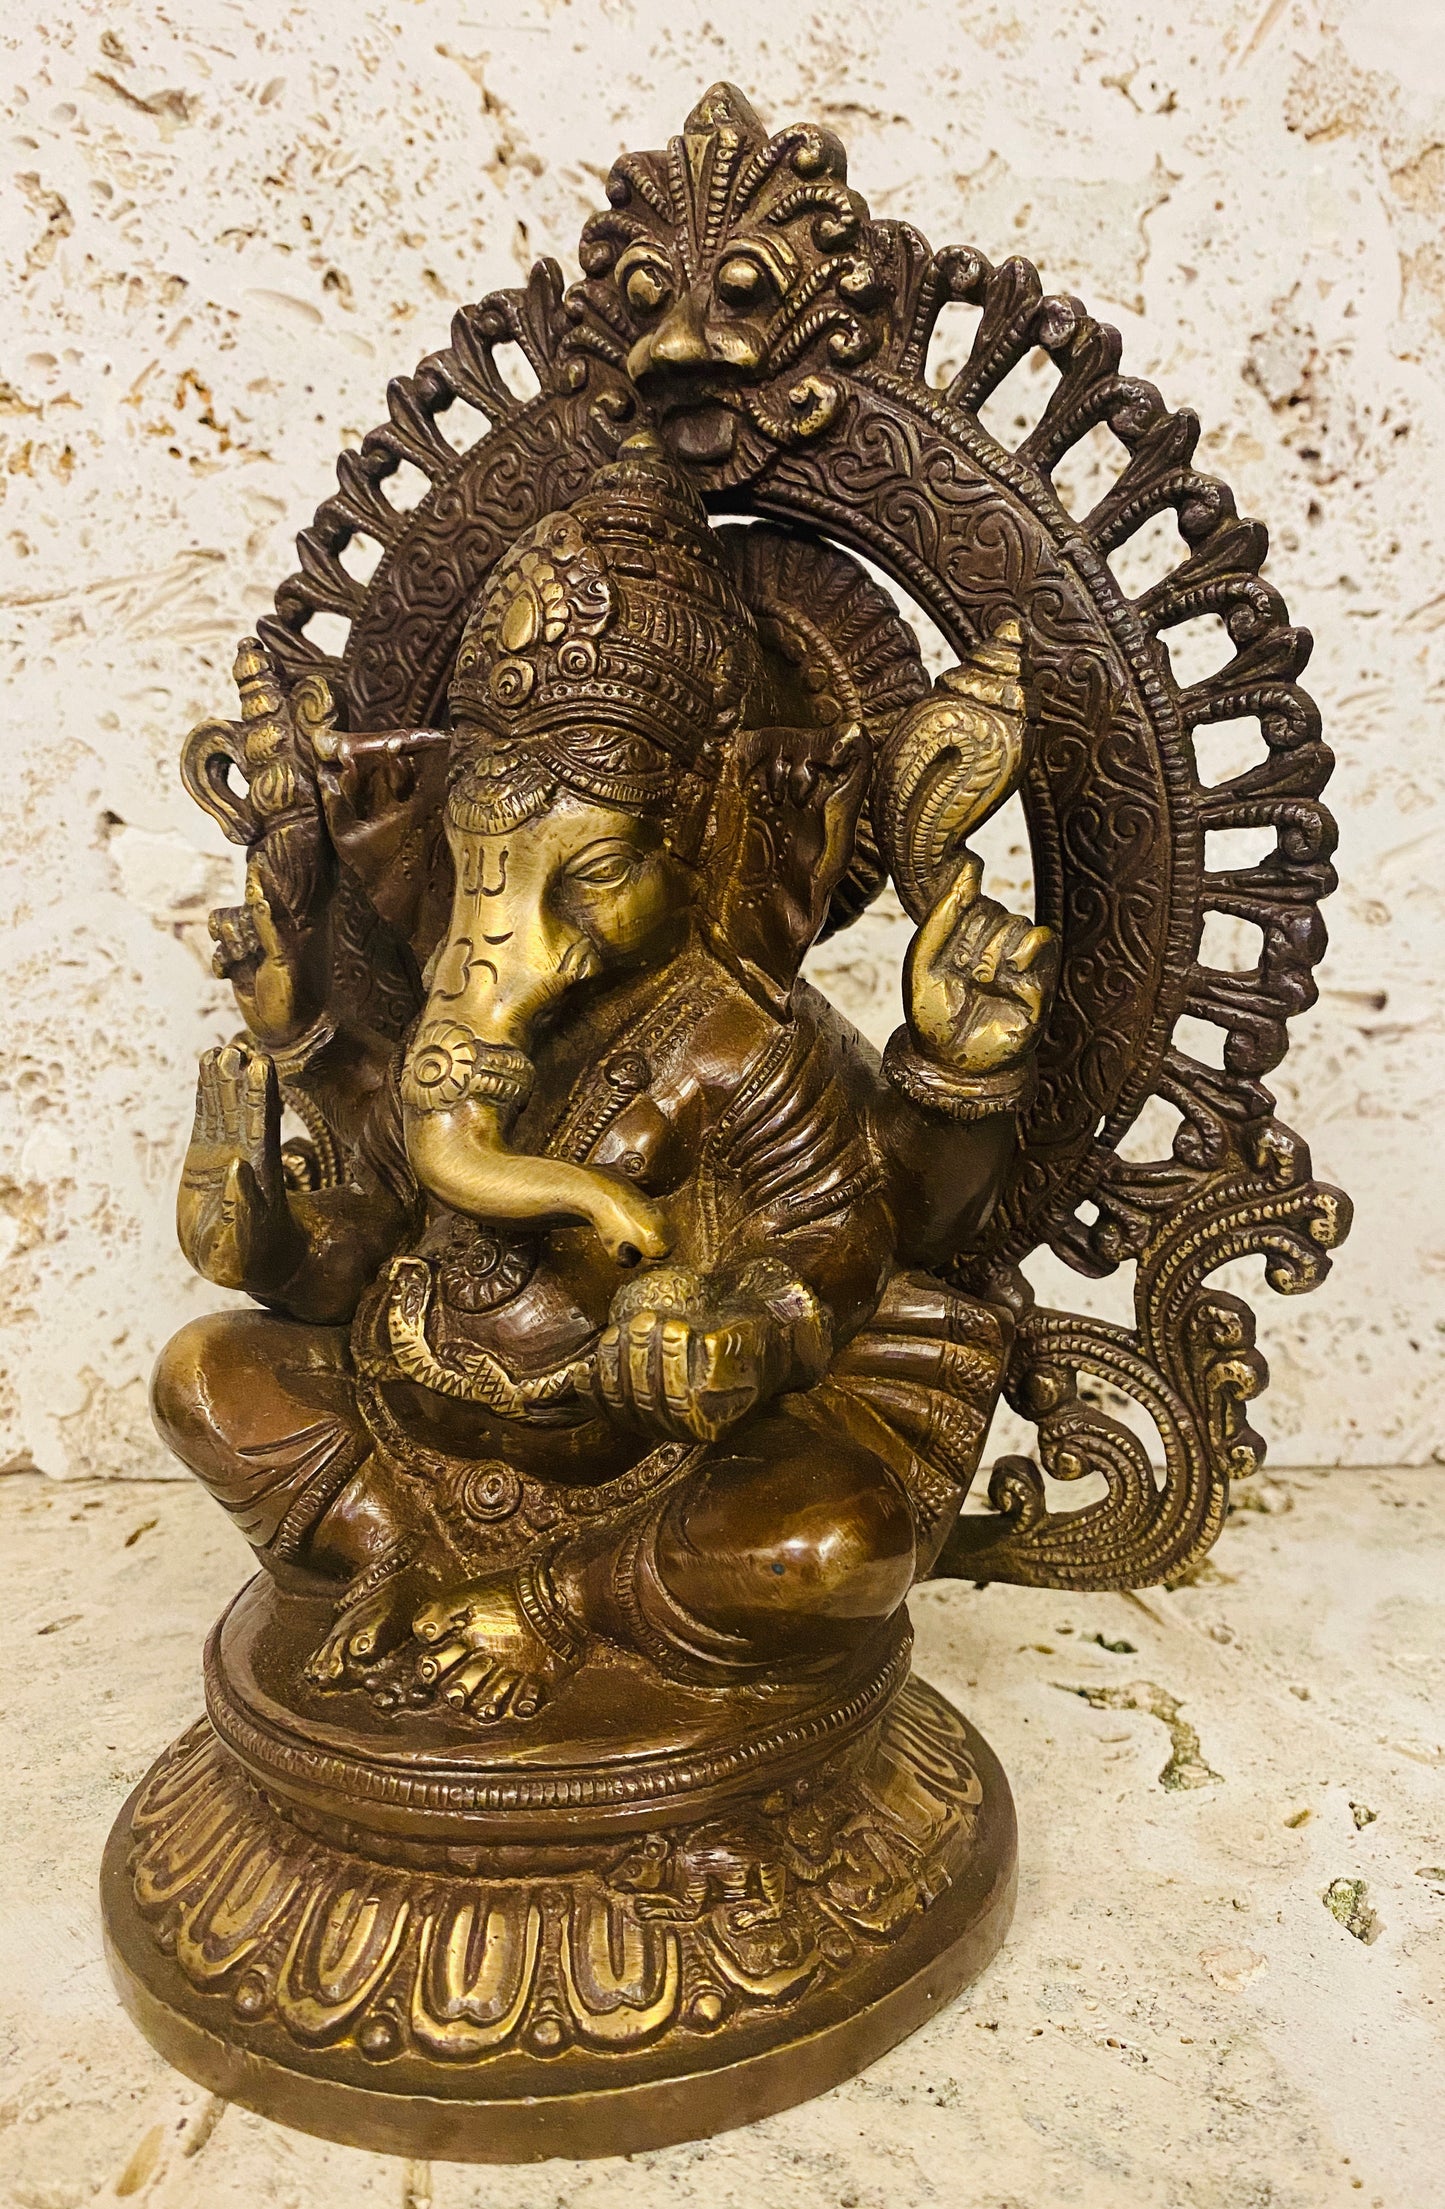 Hand Finished Brass Ganesh Statues - Remover of Obstacles 26cm x 21cm